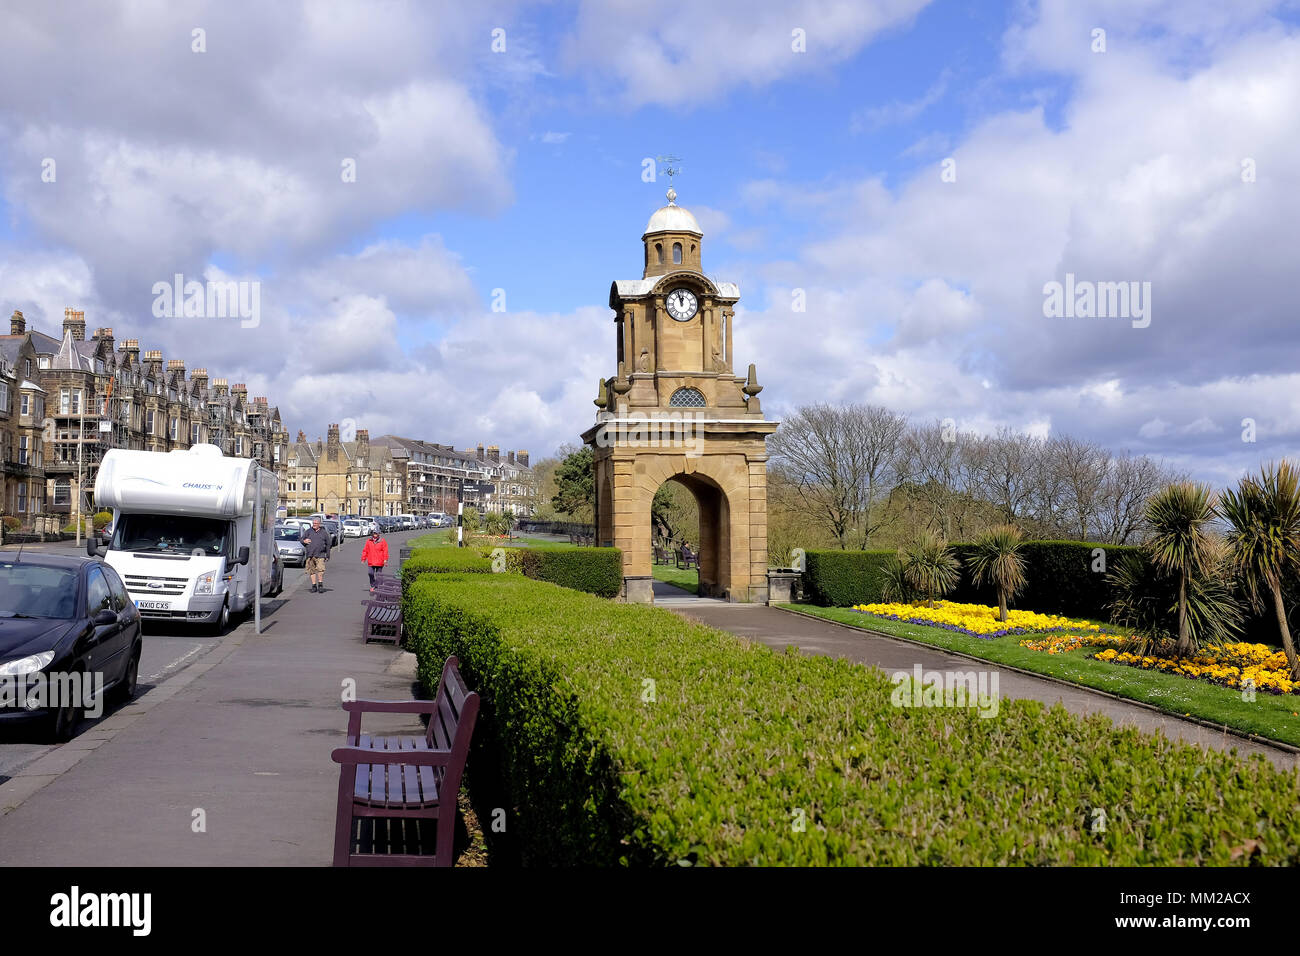 Scarborough, Yorkshire, UK. April  25, 2018.  Holidaymakers walking the Esplanade past the Holbeck clock tower and the South cliff gardens at Scarboro Stock Photo